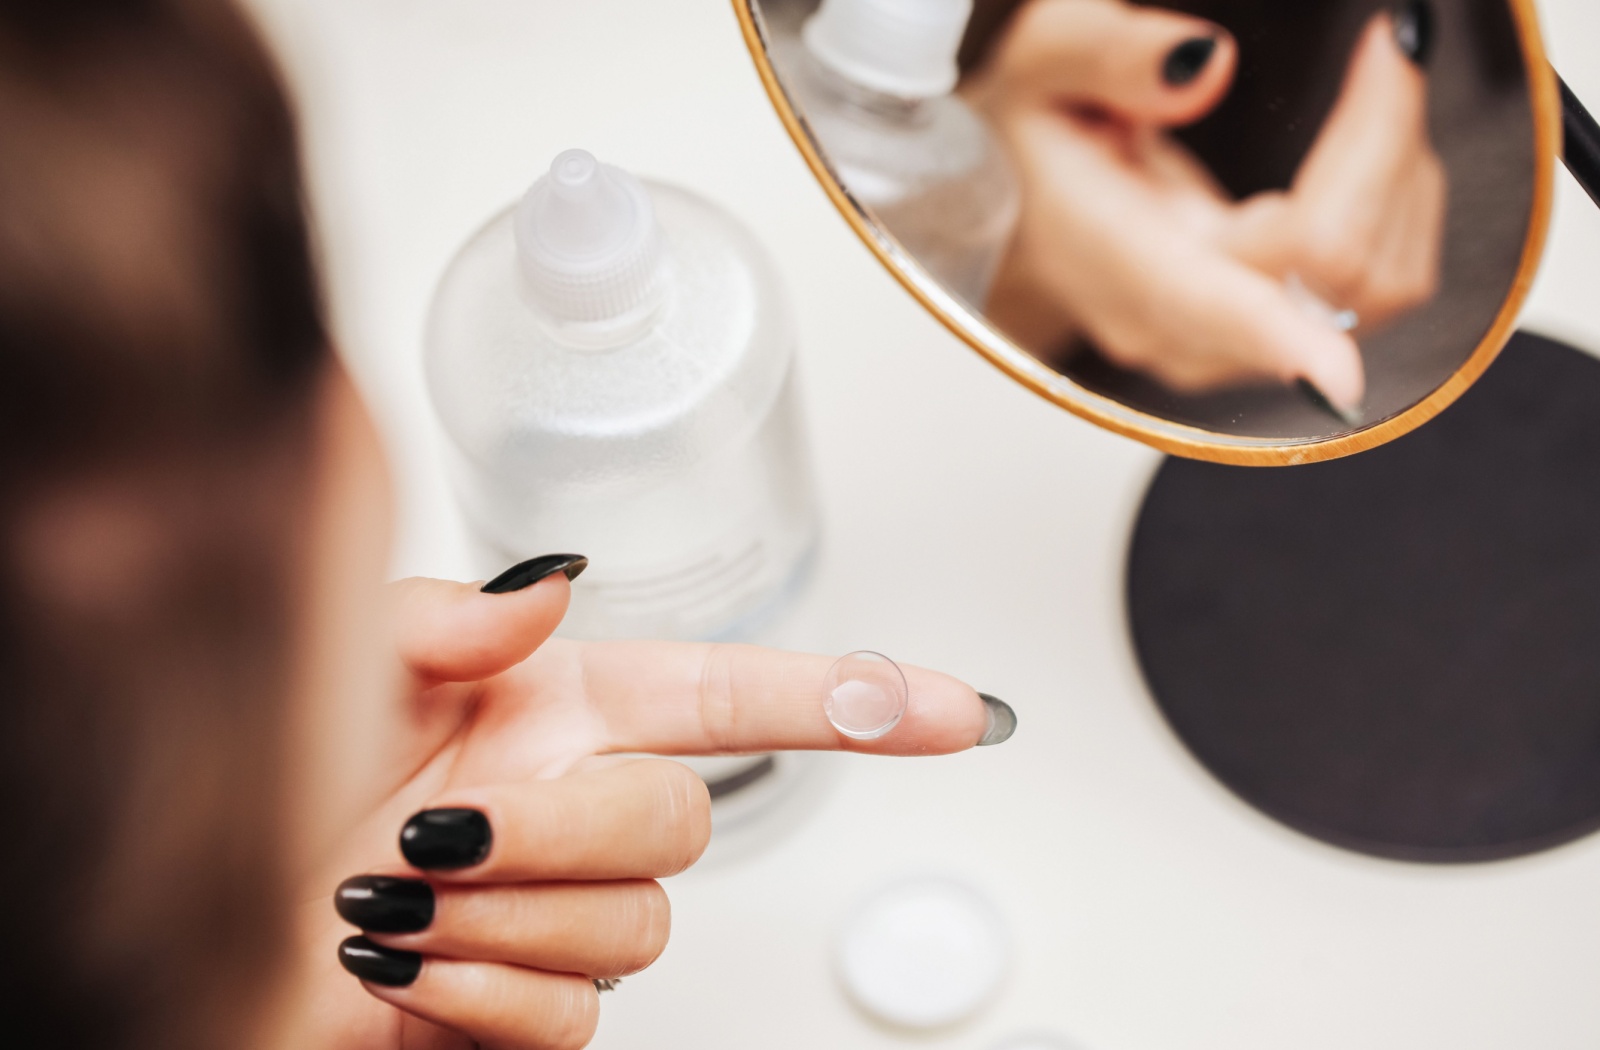 A woman with black painted nails balances a contact lens on the index finger of her left hand. A mirror reflects this image.